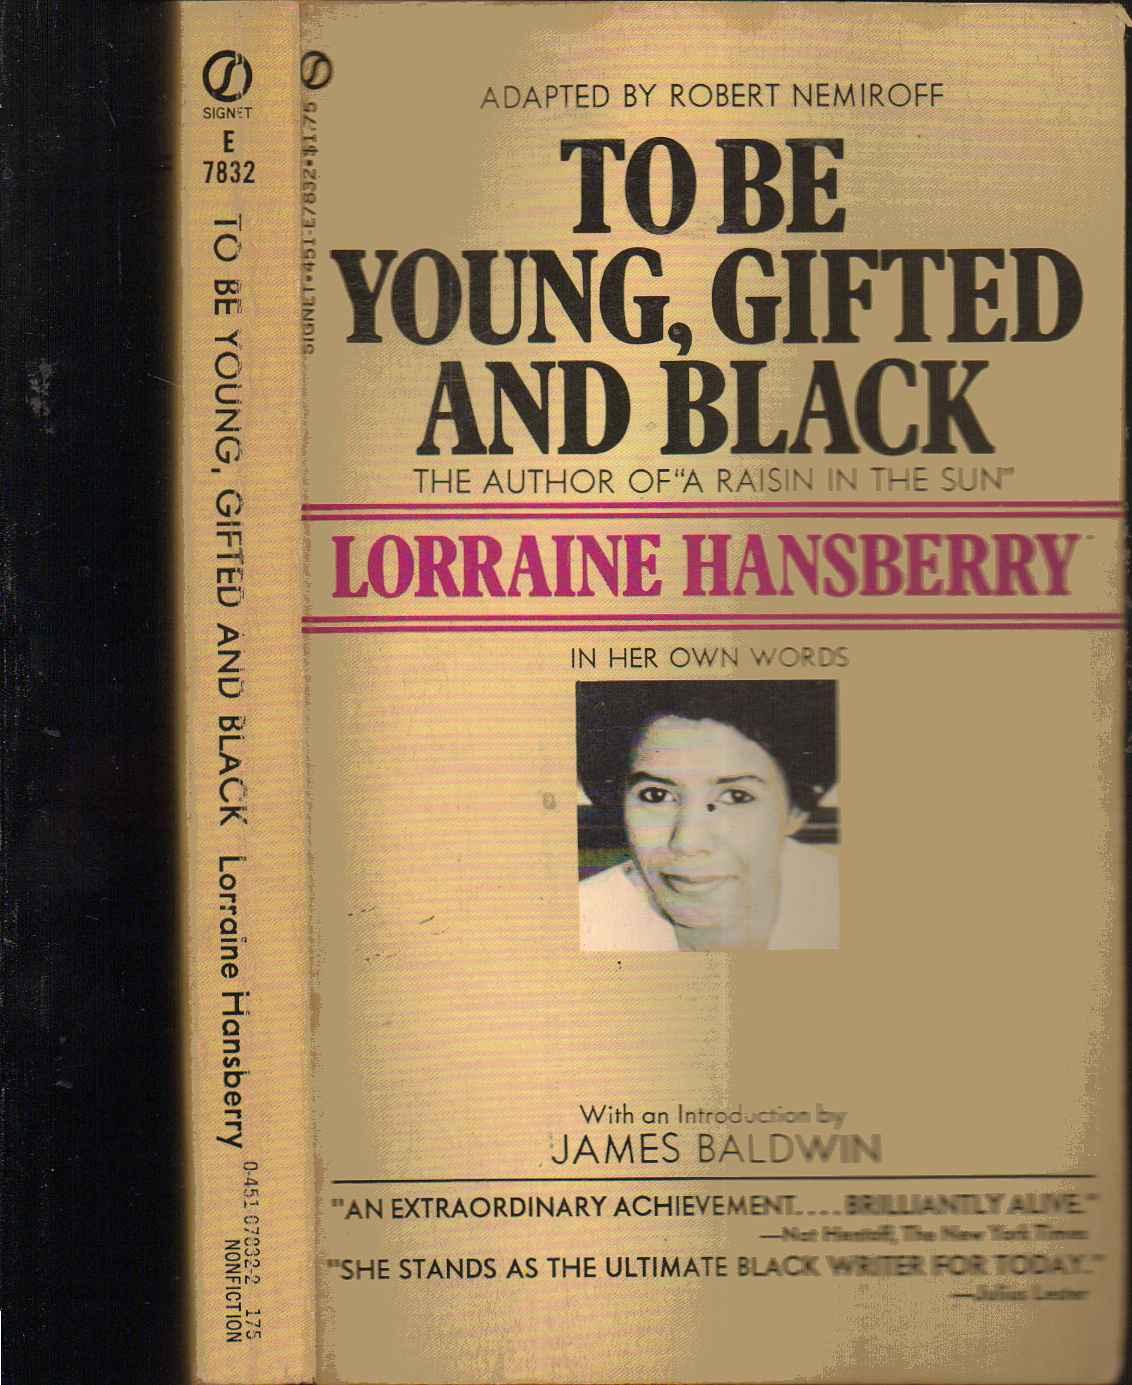 To Be Young, Gifted and Black: Lorraine Hansberry in Her Own Words - Lorraine Hansberry; Adapted By Robert Nemiroff; Intro By James Baldwin